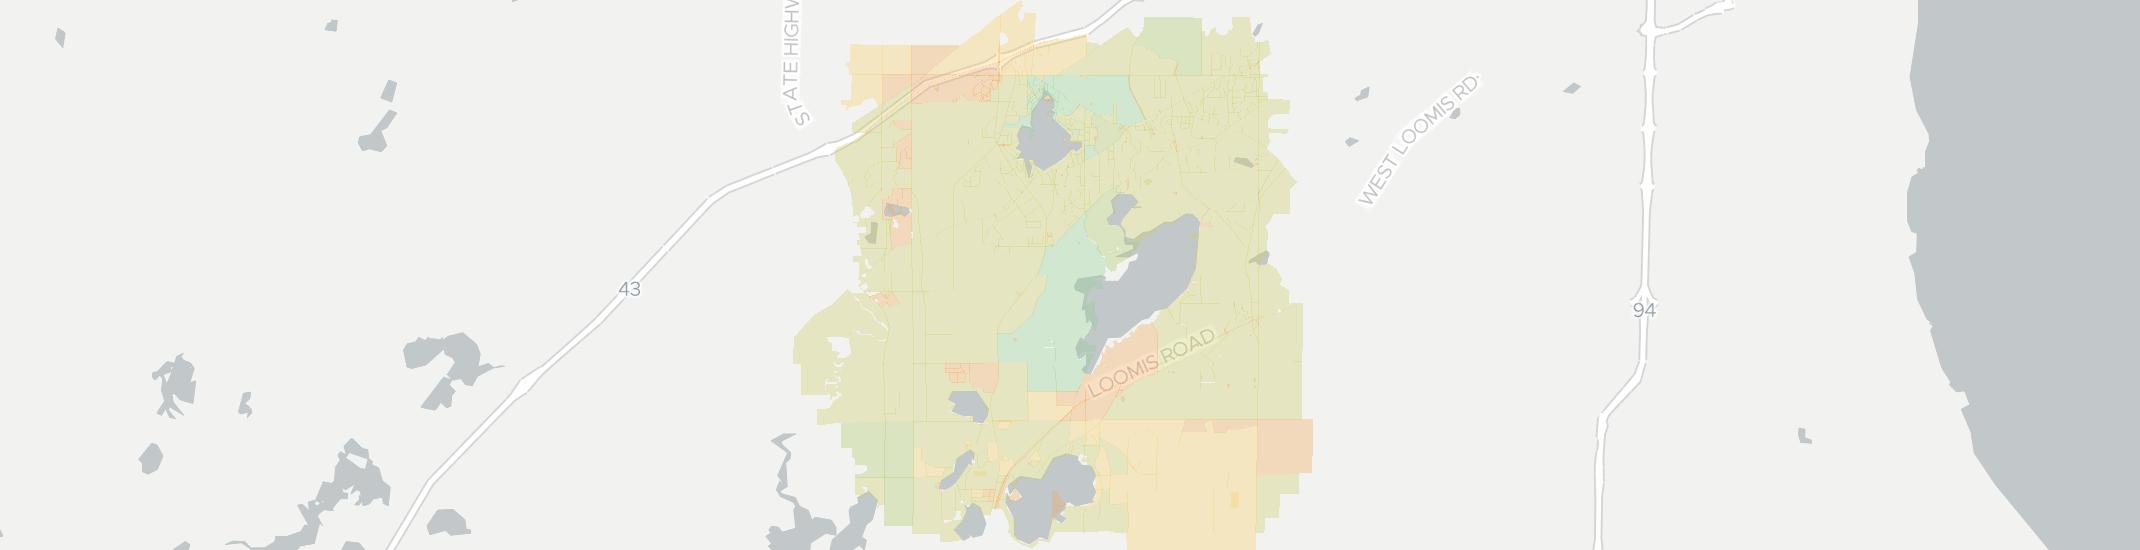 Muskego Internet Competition Map. Click for interactive map.